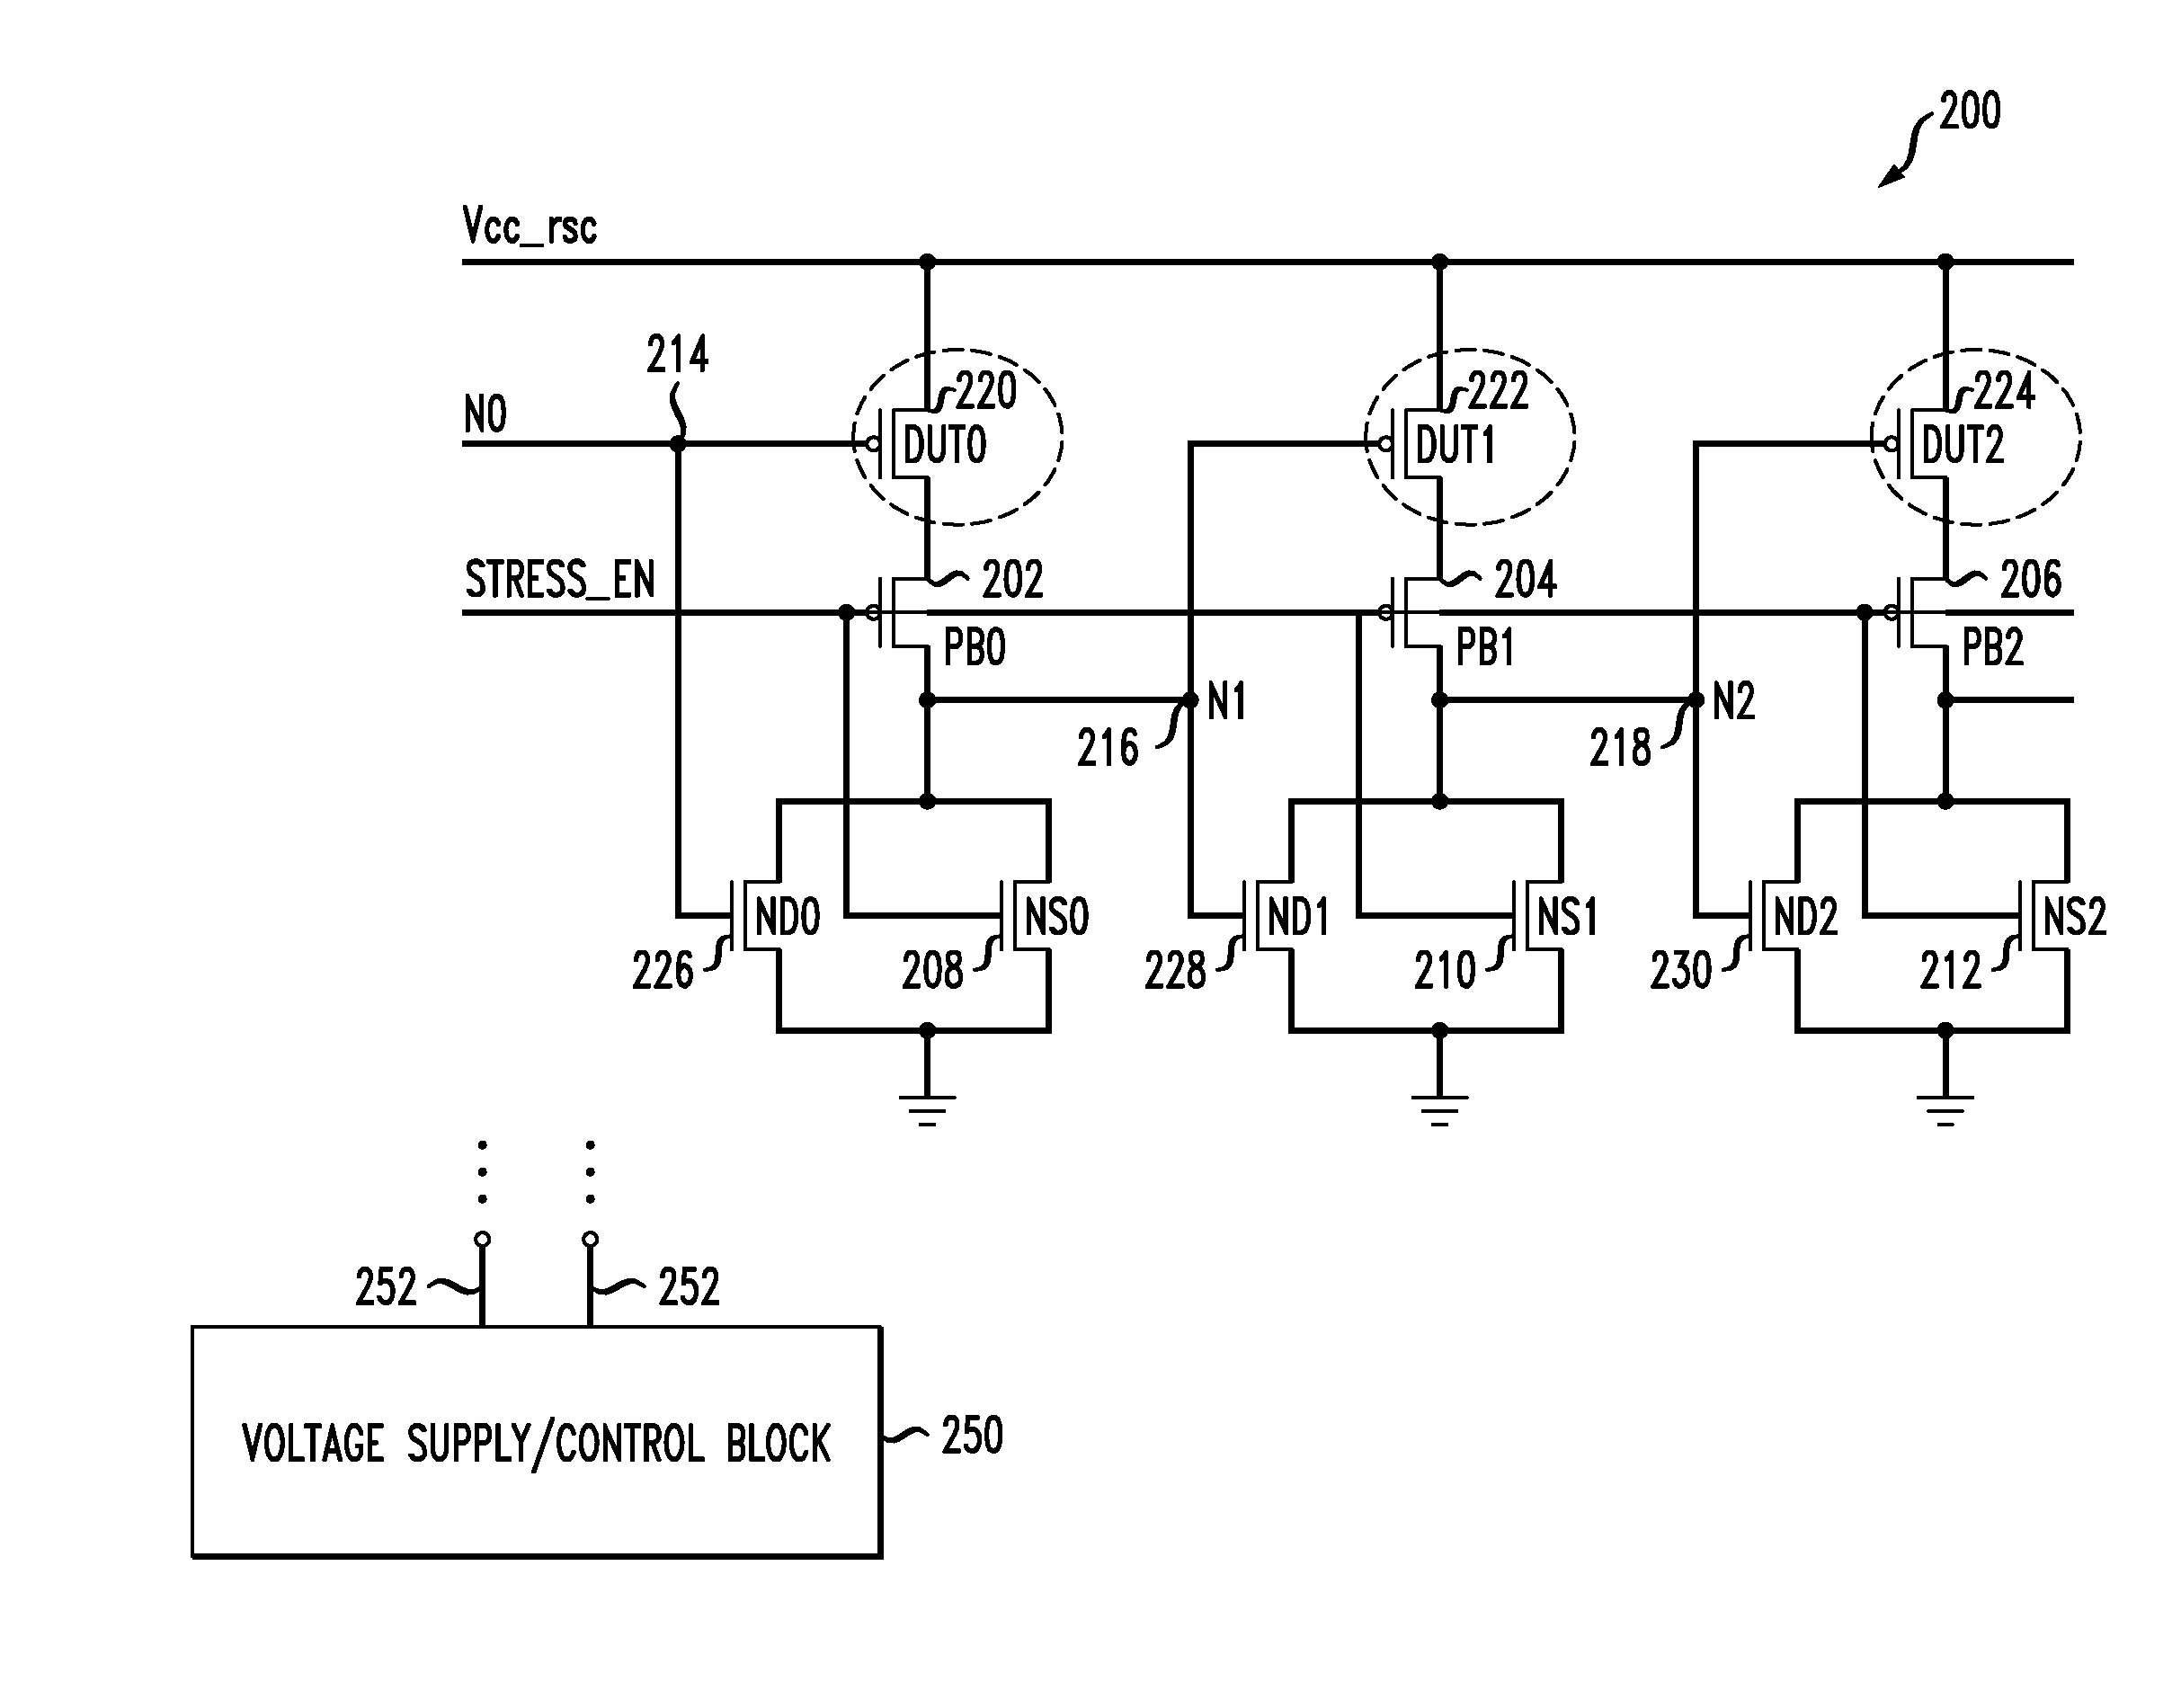 Circuits and design structures for monitoring nbti (negative bias temperature instability) effect and/or pbti (positive bias temperature instability) effect